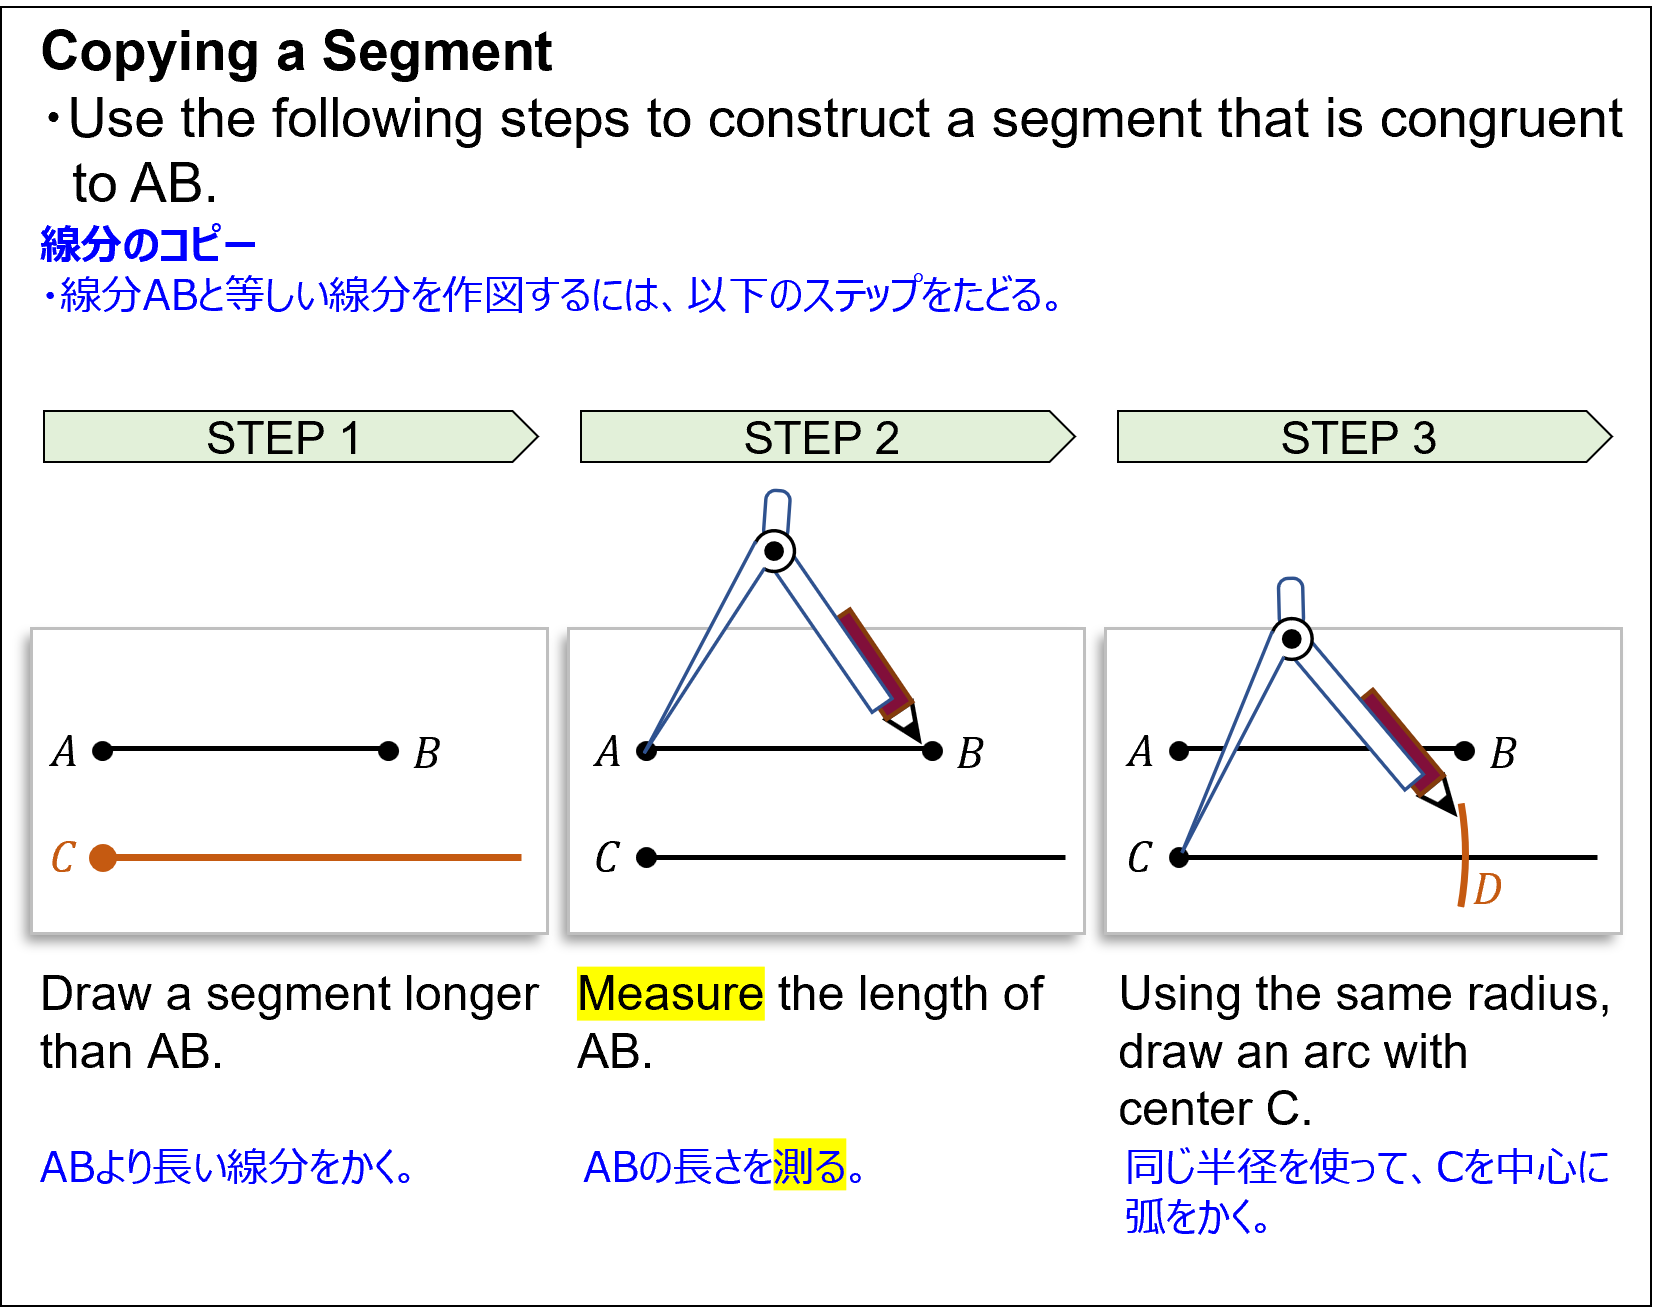 Illustrating how to copy a segment